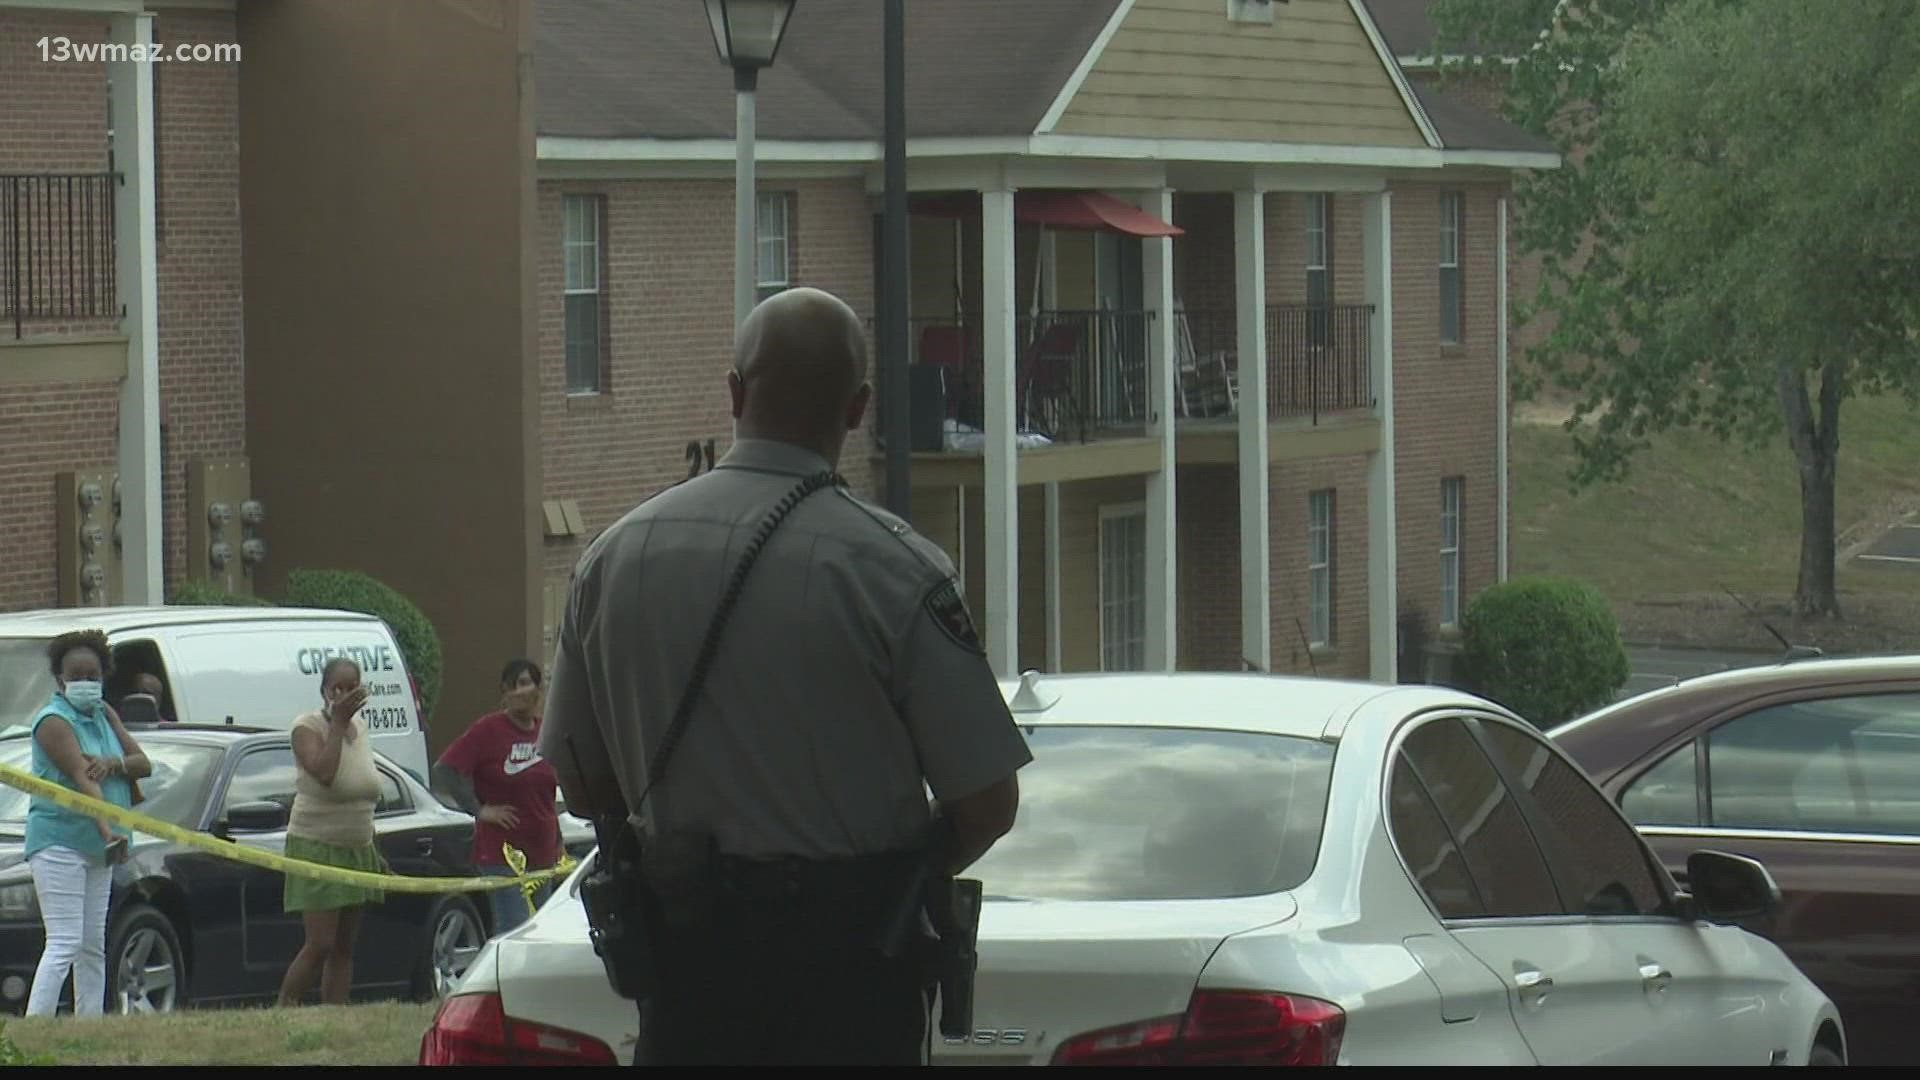 A 33-year-old man is dead after a shooting Thursday afternoon at River Park apartments in Macon.